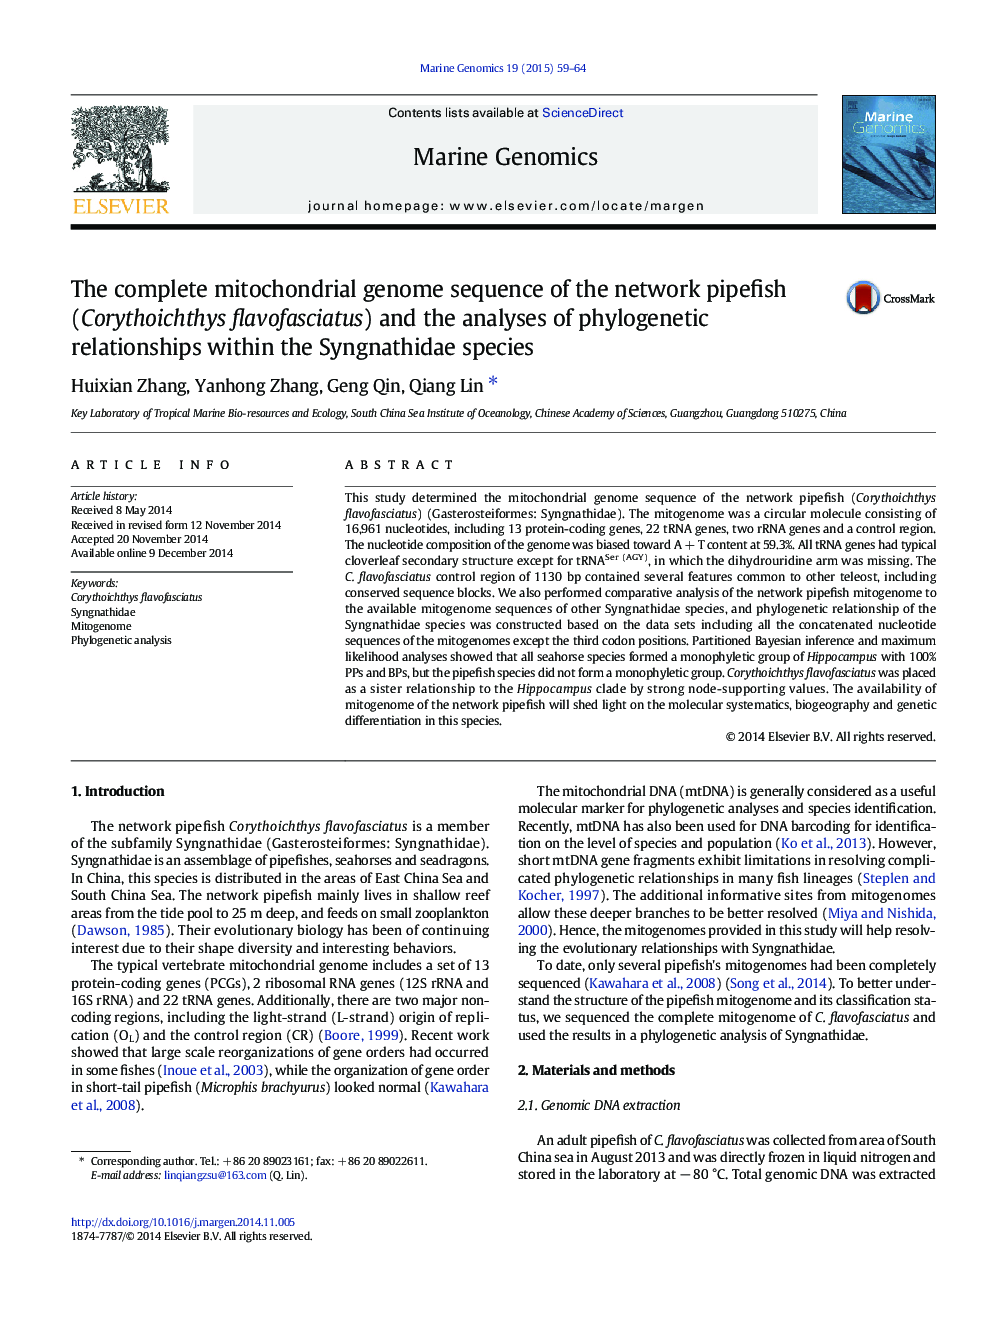 The complete mitochondrial genome sequence of the network pipefish (Corythoichthys flavofasciatus) and the analyses of phylogenetic relationships within the Syngnathidae species